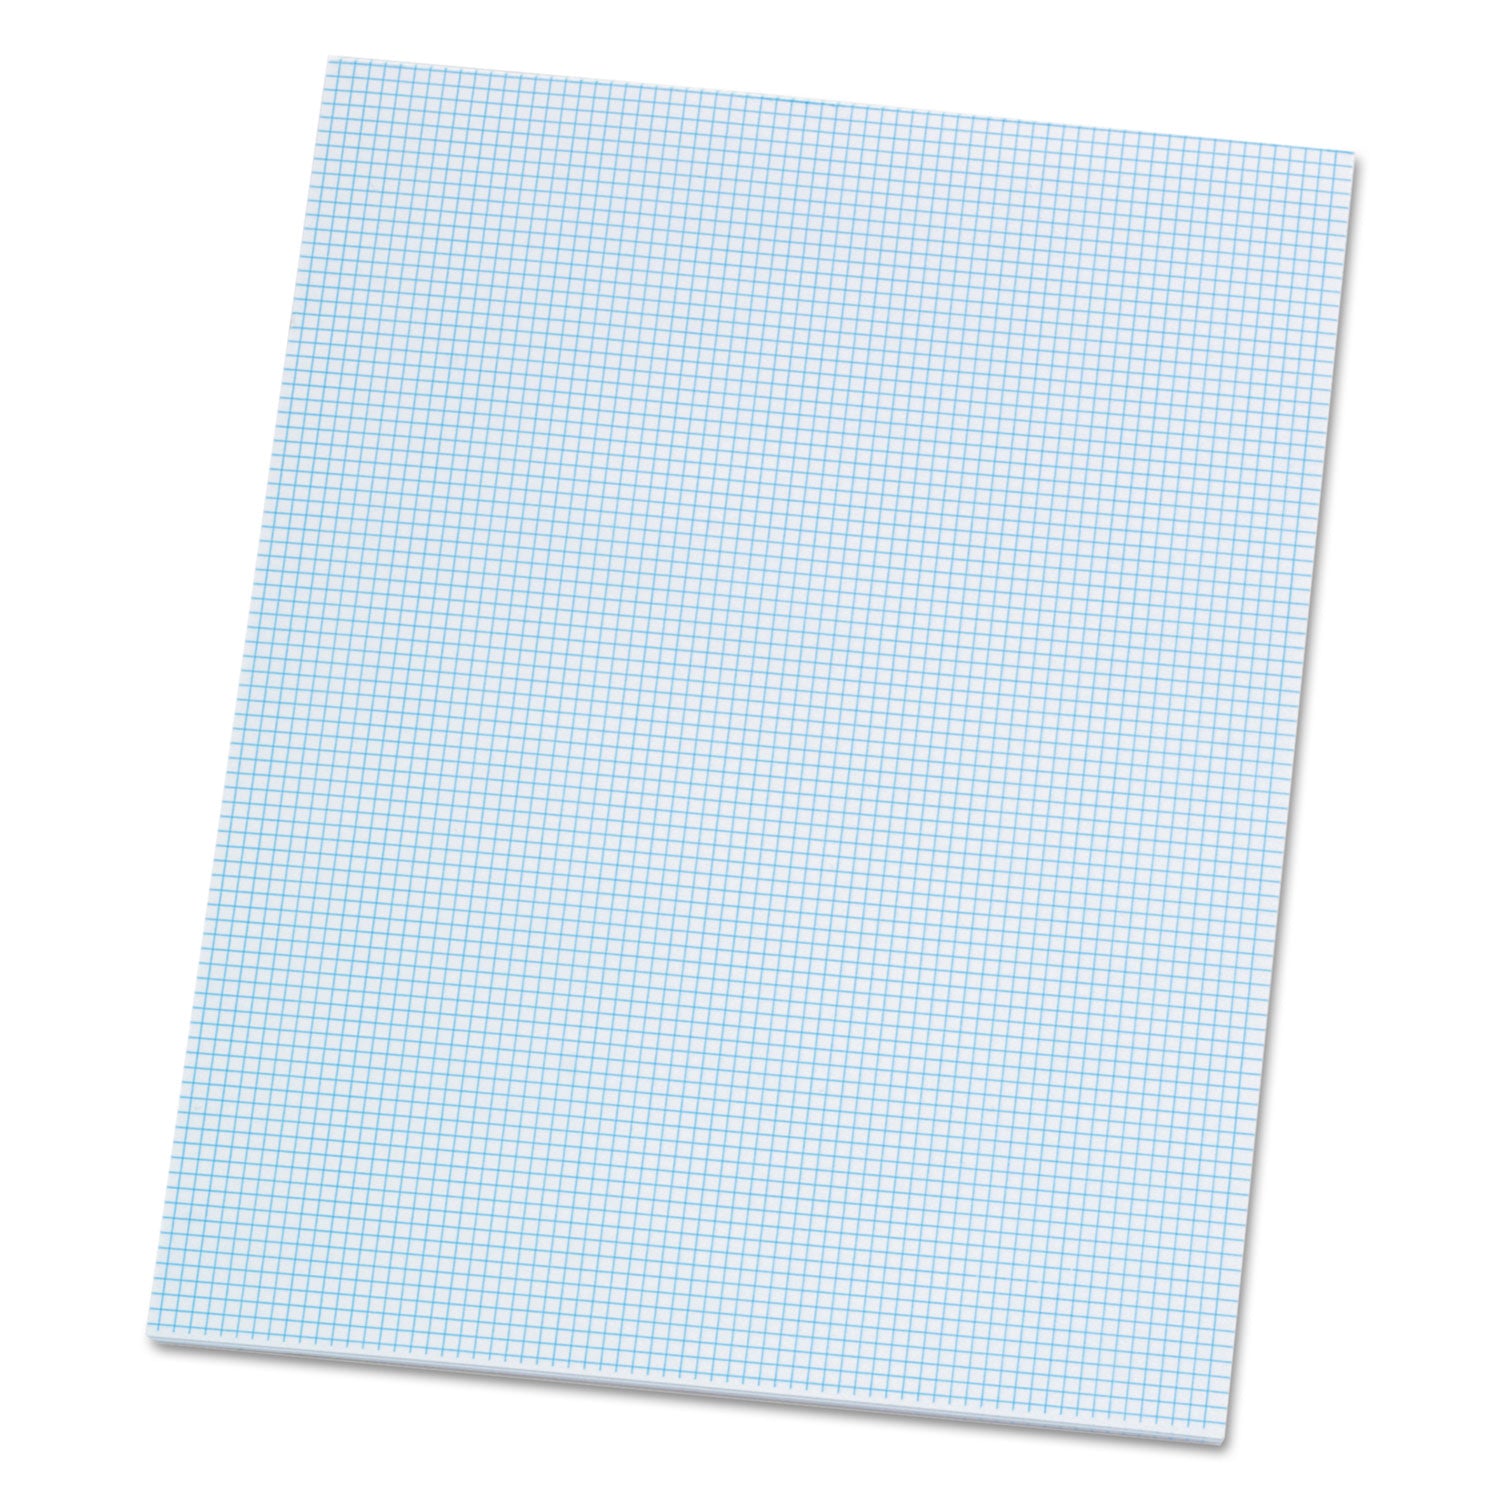 Quadrille Pads, Quadrille Rule (8 sq/in), 50 White (Heavyweight 20 lb Bond) 8.5 x 11 Sheets - 